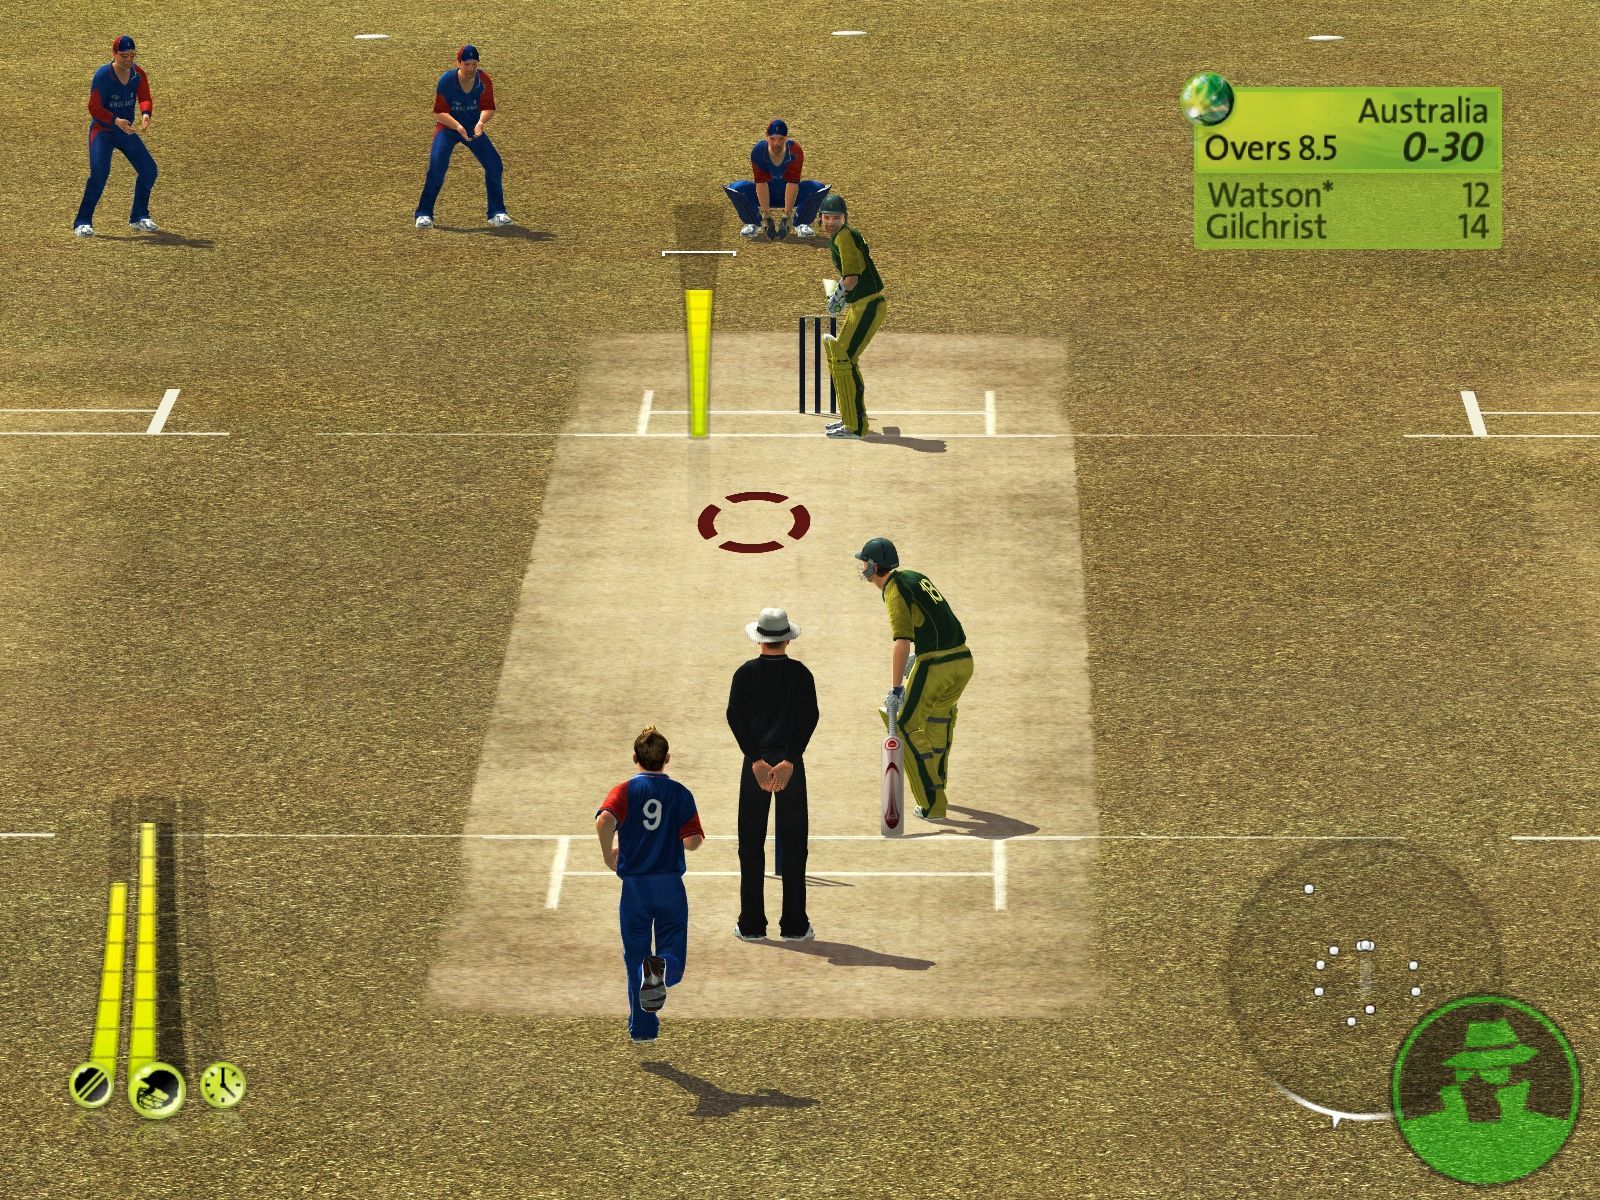 How to swing the ball in cricket 2007 game online